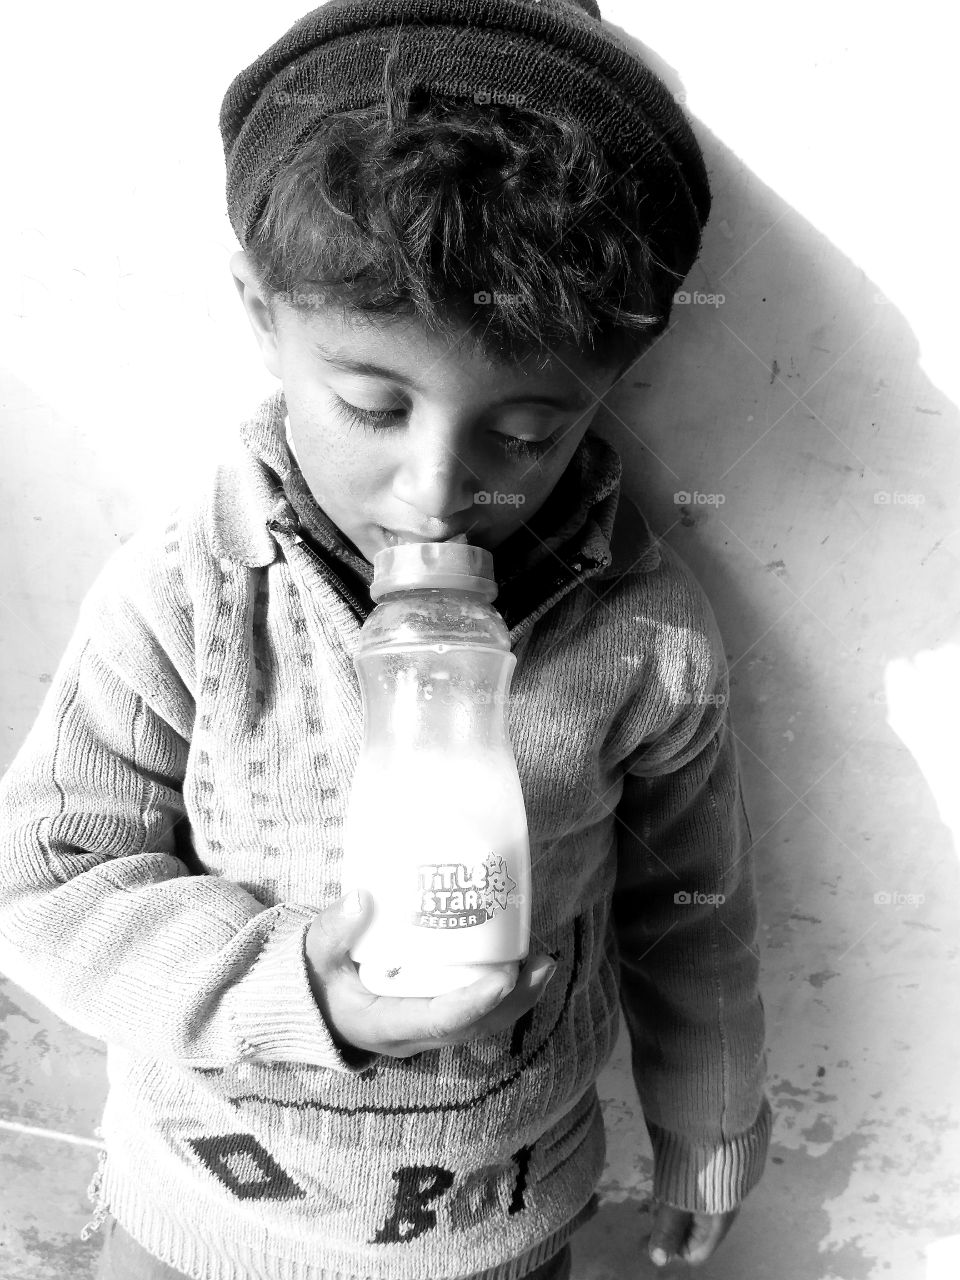 my beautifull baby Sameer Rana Drinking Feedr milk so amaizing nd awesome picture..